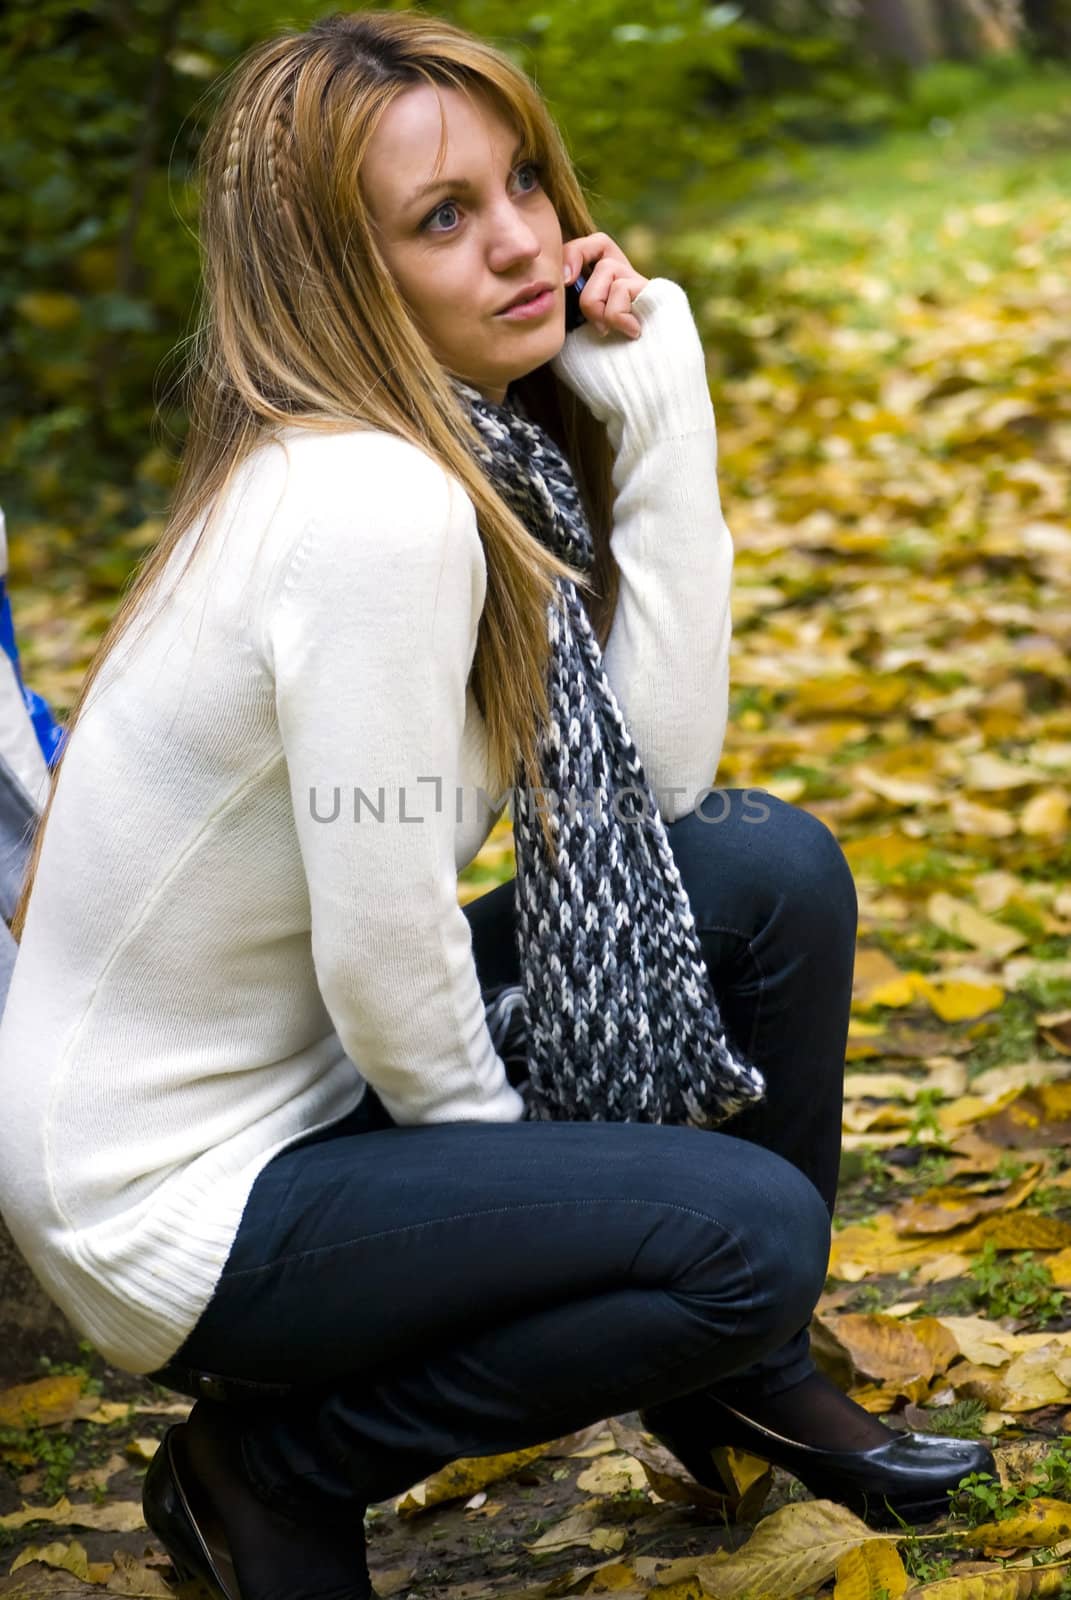 cute blond girl talking on phone outdoors in autumn